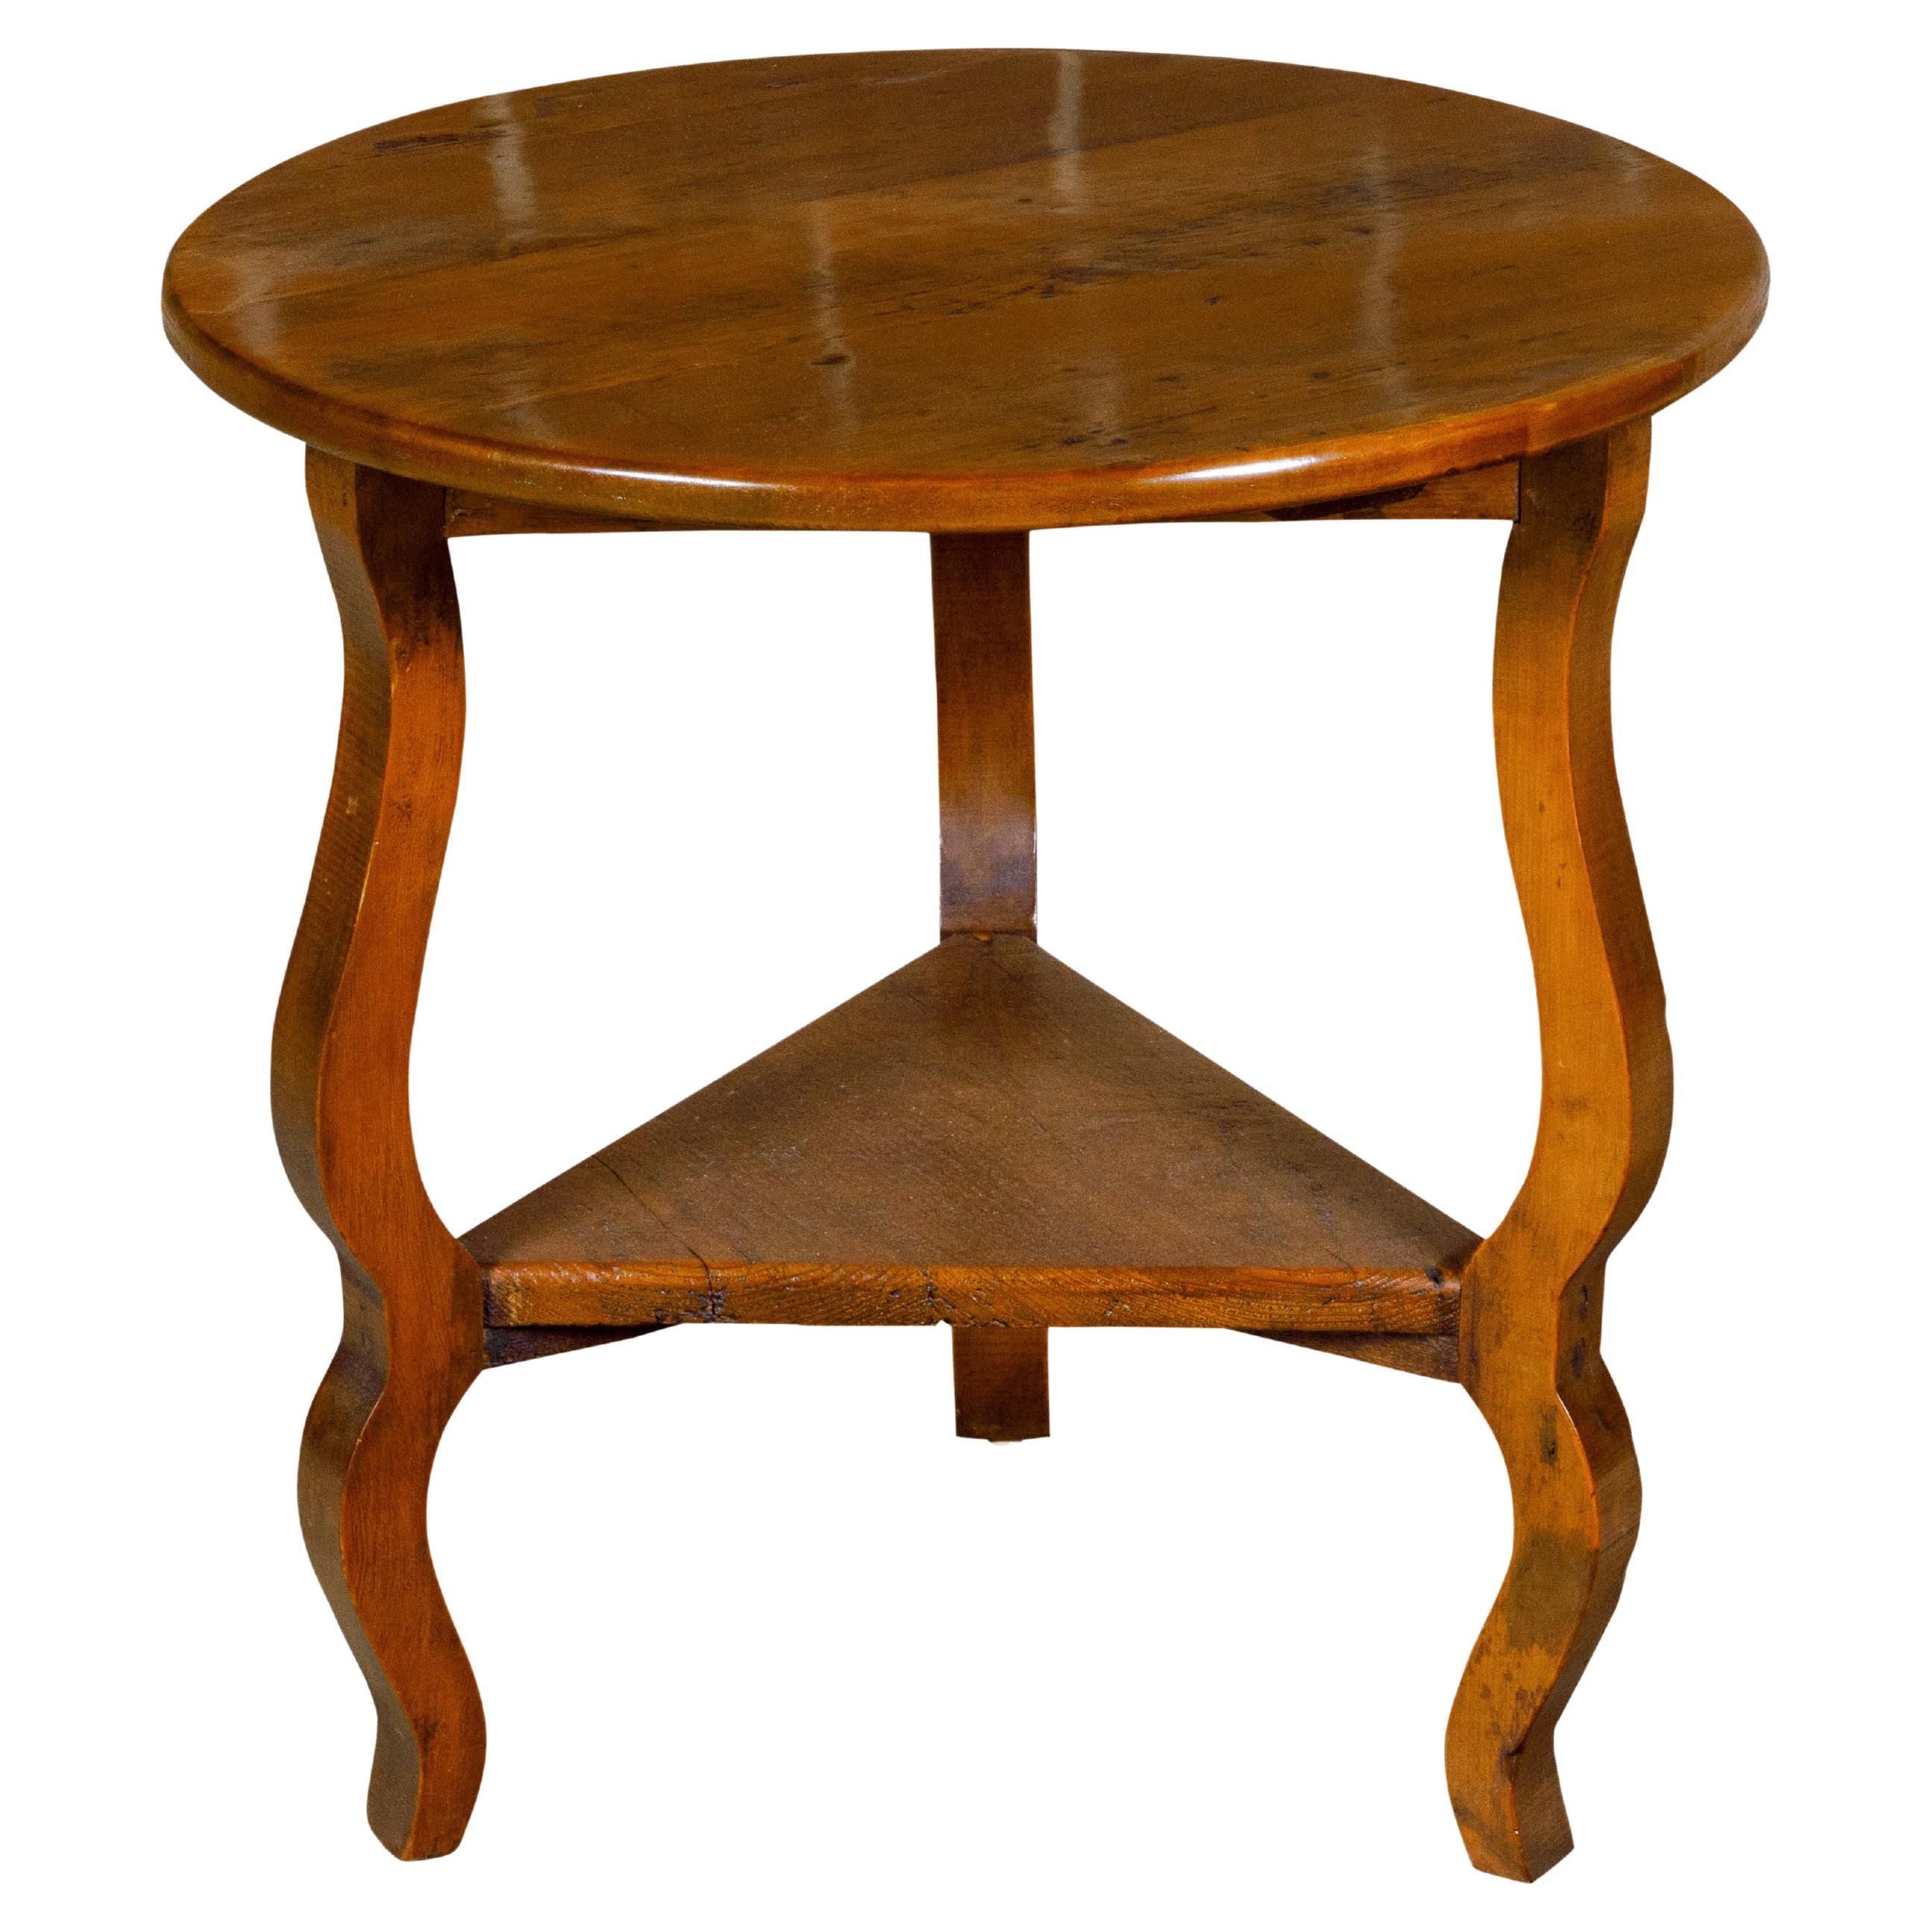 English Pine Side Table with Circular Top, Curving Legs and Triangular Shelf For Sale